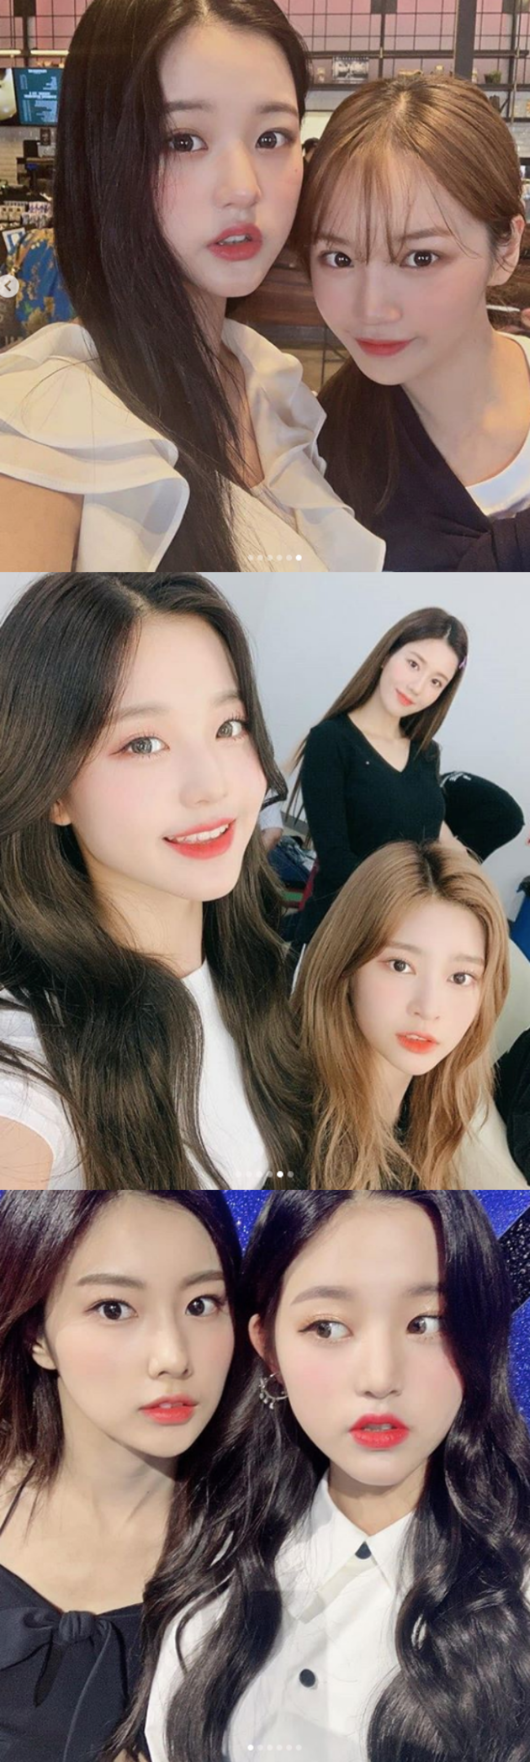 Girl group IZ*ONE member Jang Won-young released Selfie for birthday.On the afternoon of the 31st, IZ*ONEs official SNS said, Won Young will be proud of his birthday. The hot Summer also announced that he could not grow up in front of Wool Won Young.But even after Summer, I can not take off my sunglasses. I can not see my eyes when I see Won Young. The photo showed the daily life of Jang Won-young and IZ*ONE members.IZ*ONE members affectionate moments, such as before and after the stage, were captured and attracted attention.In particular, Jang Won-young boasts a lovely charm with beautiful looks like dolls.Jang Won-young is in the top spot in the cable channel Mnet survival program Produce 48 and debuted as an IZ*ONE member.IZ*ONE Official SNS